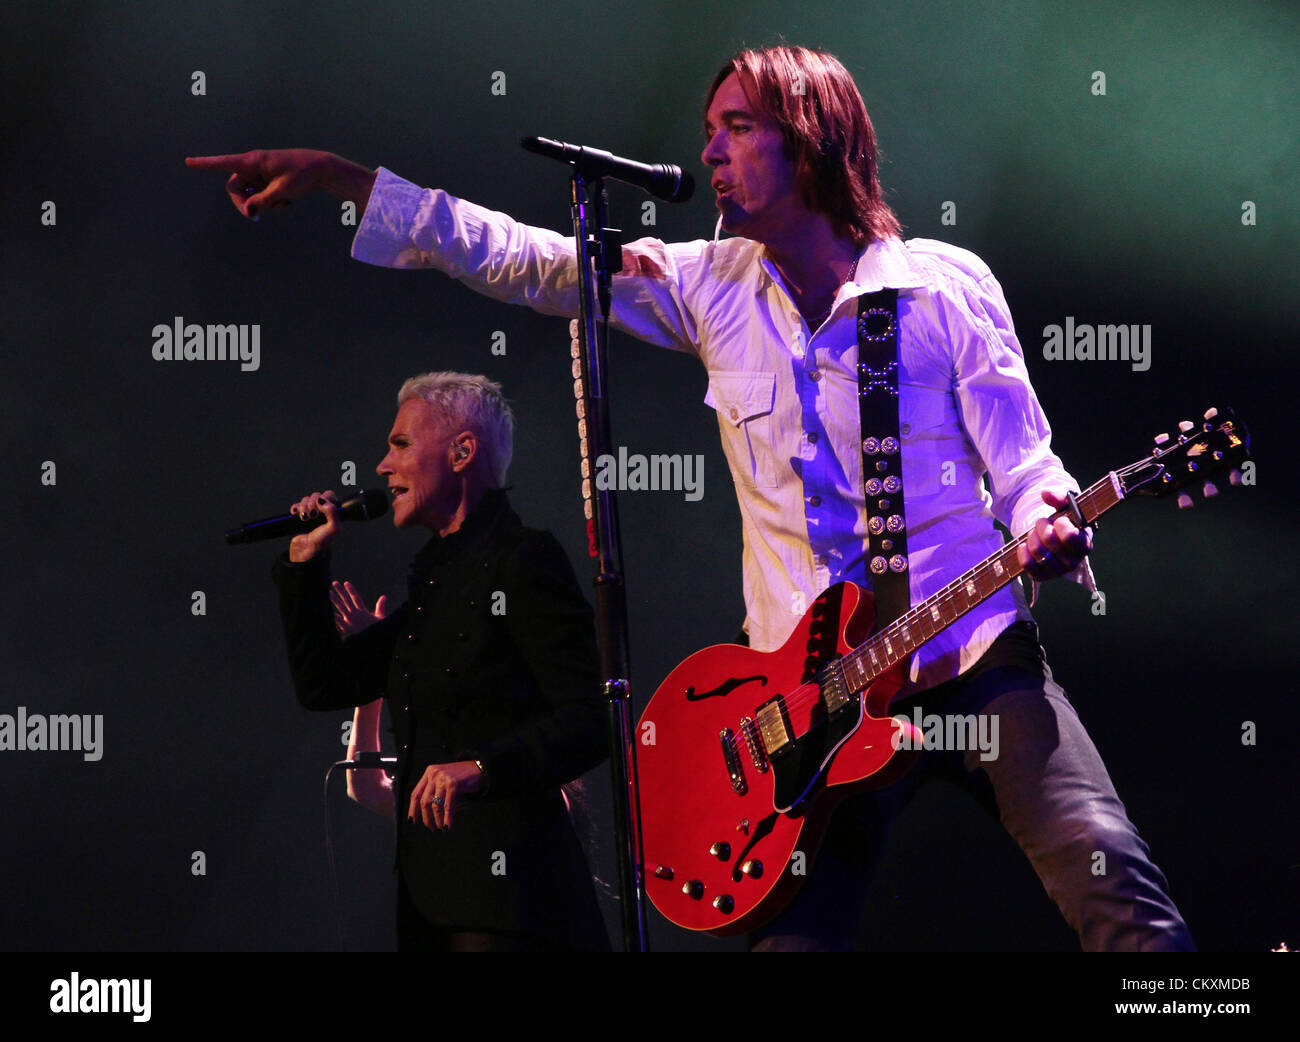 Ottawa, Ontario, Canada. 29th Aug 2012. Marie Fredriksson (L) and Per Gessle (R), of Roxette performs at Scotiabank Place on Wednesday, August 29, 2012. (Credit Image: © Kamal Sellehuddin/ZUMAPRESS.com) Stock Photo